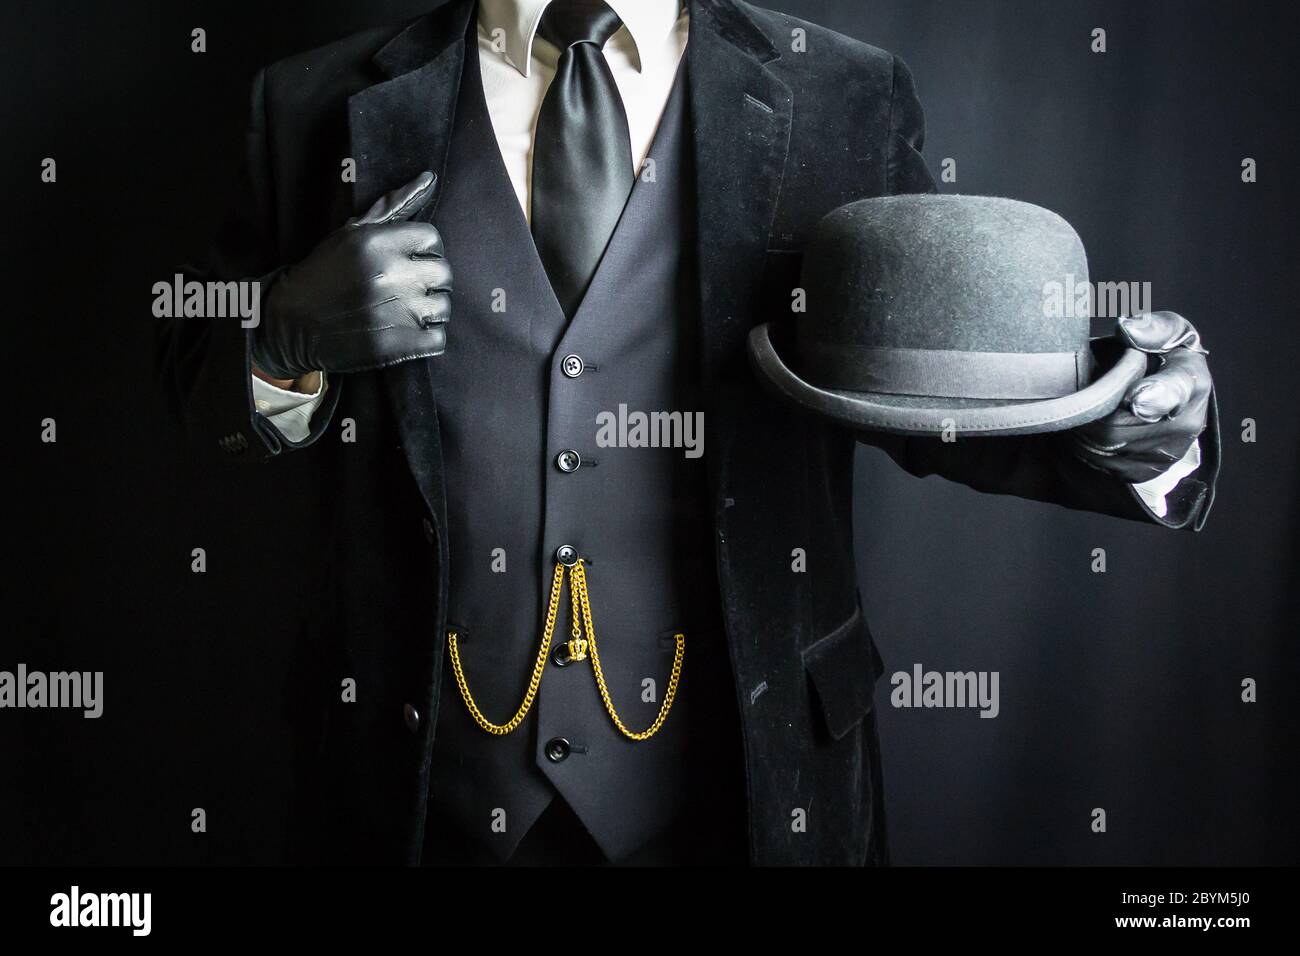 Portrait of Well Dressed Man in Dark Suit and Leather Gloves Holding Bowler Hat. Concept of Classic and Eccentric British Gentleman. Retro Fashion. Stock Photo